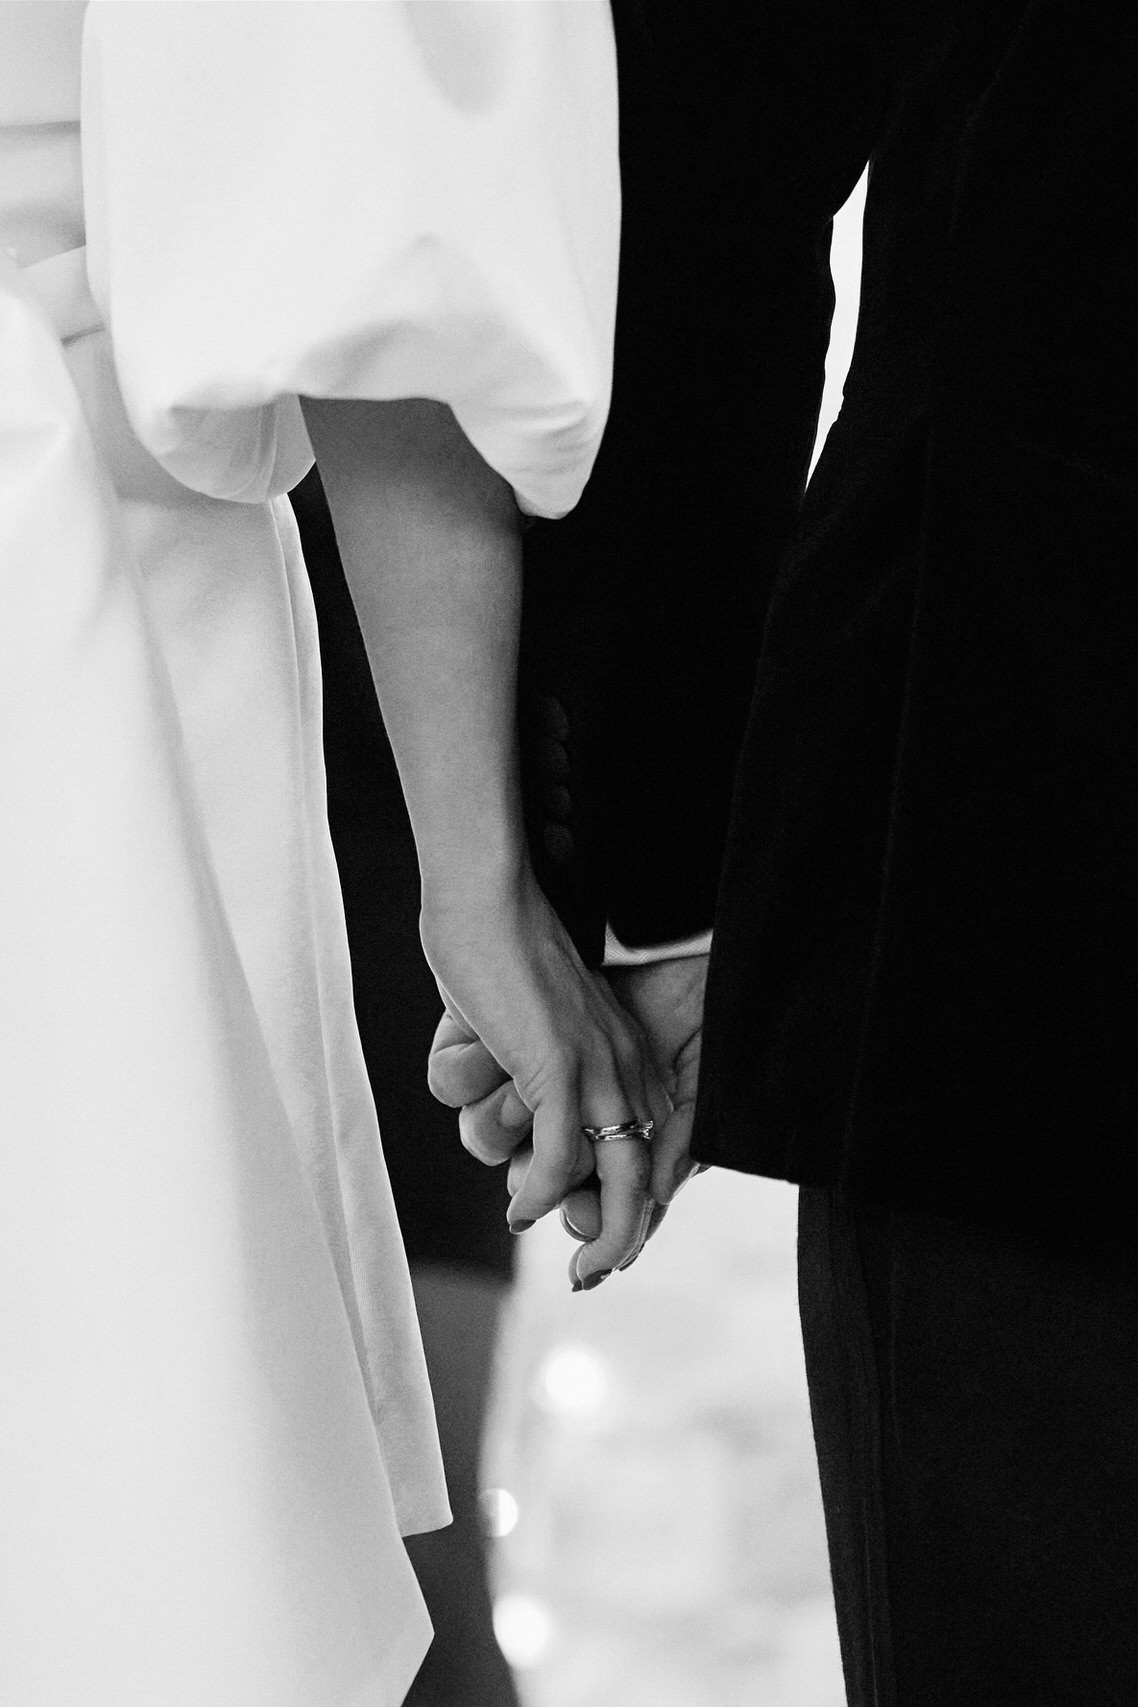 A picture in black and white showing a pair holding hands.